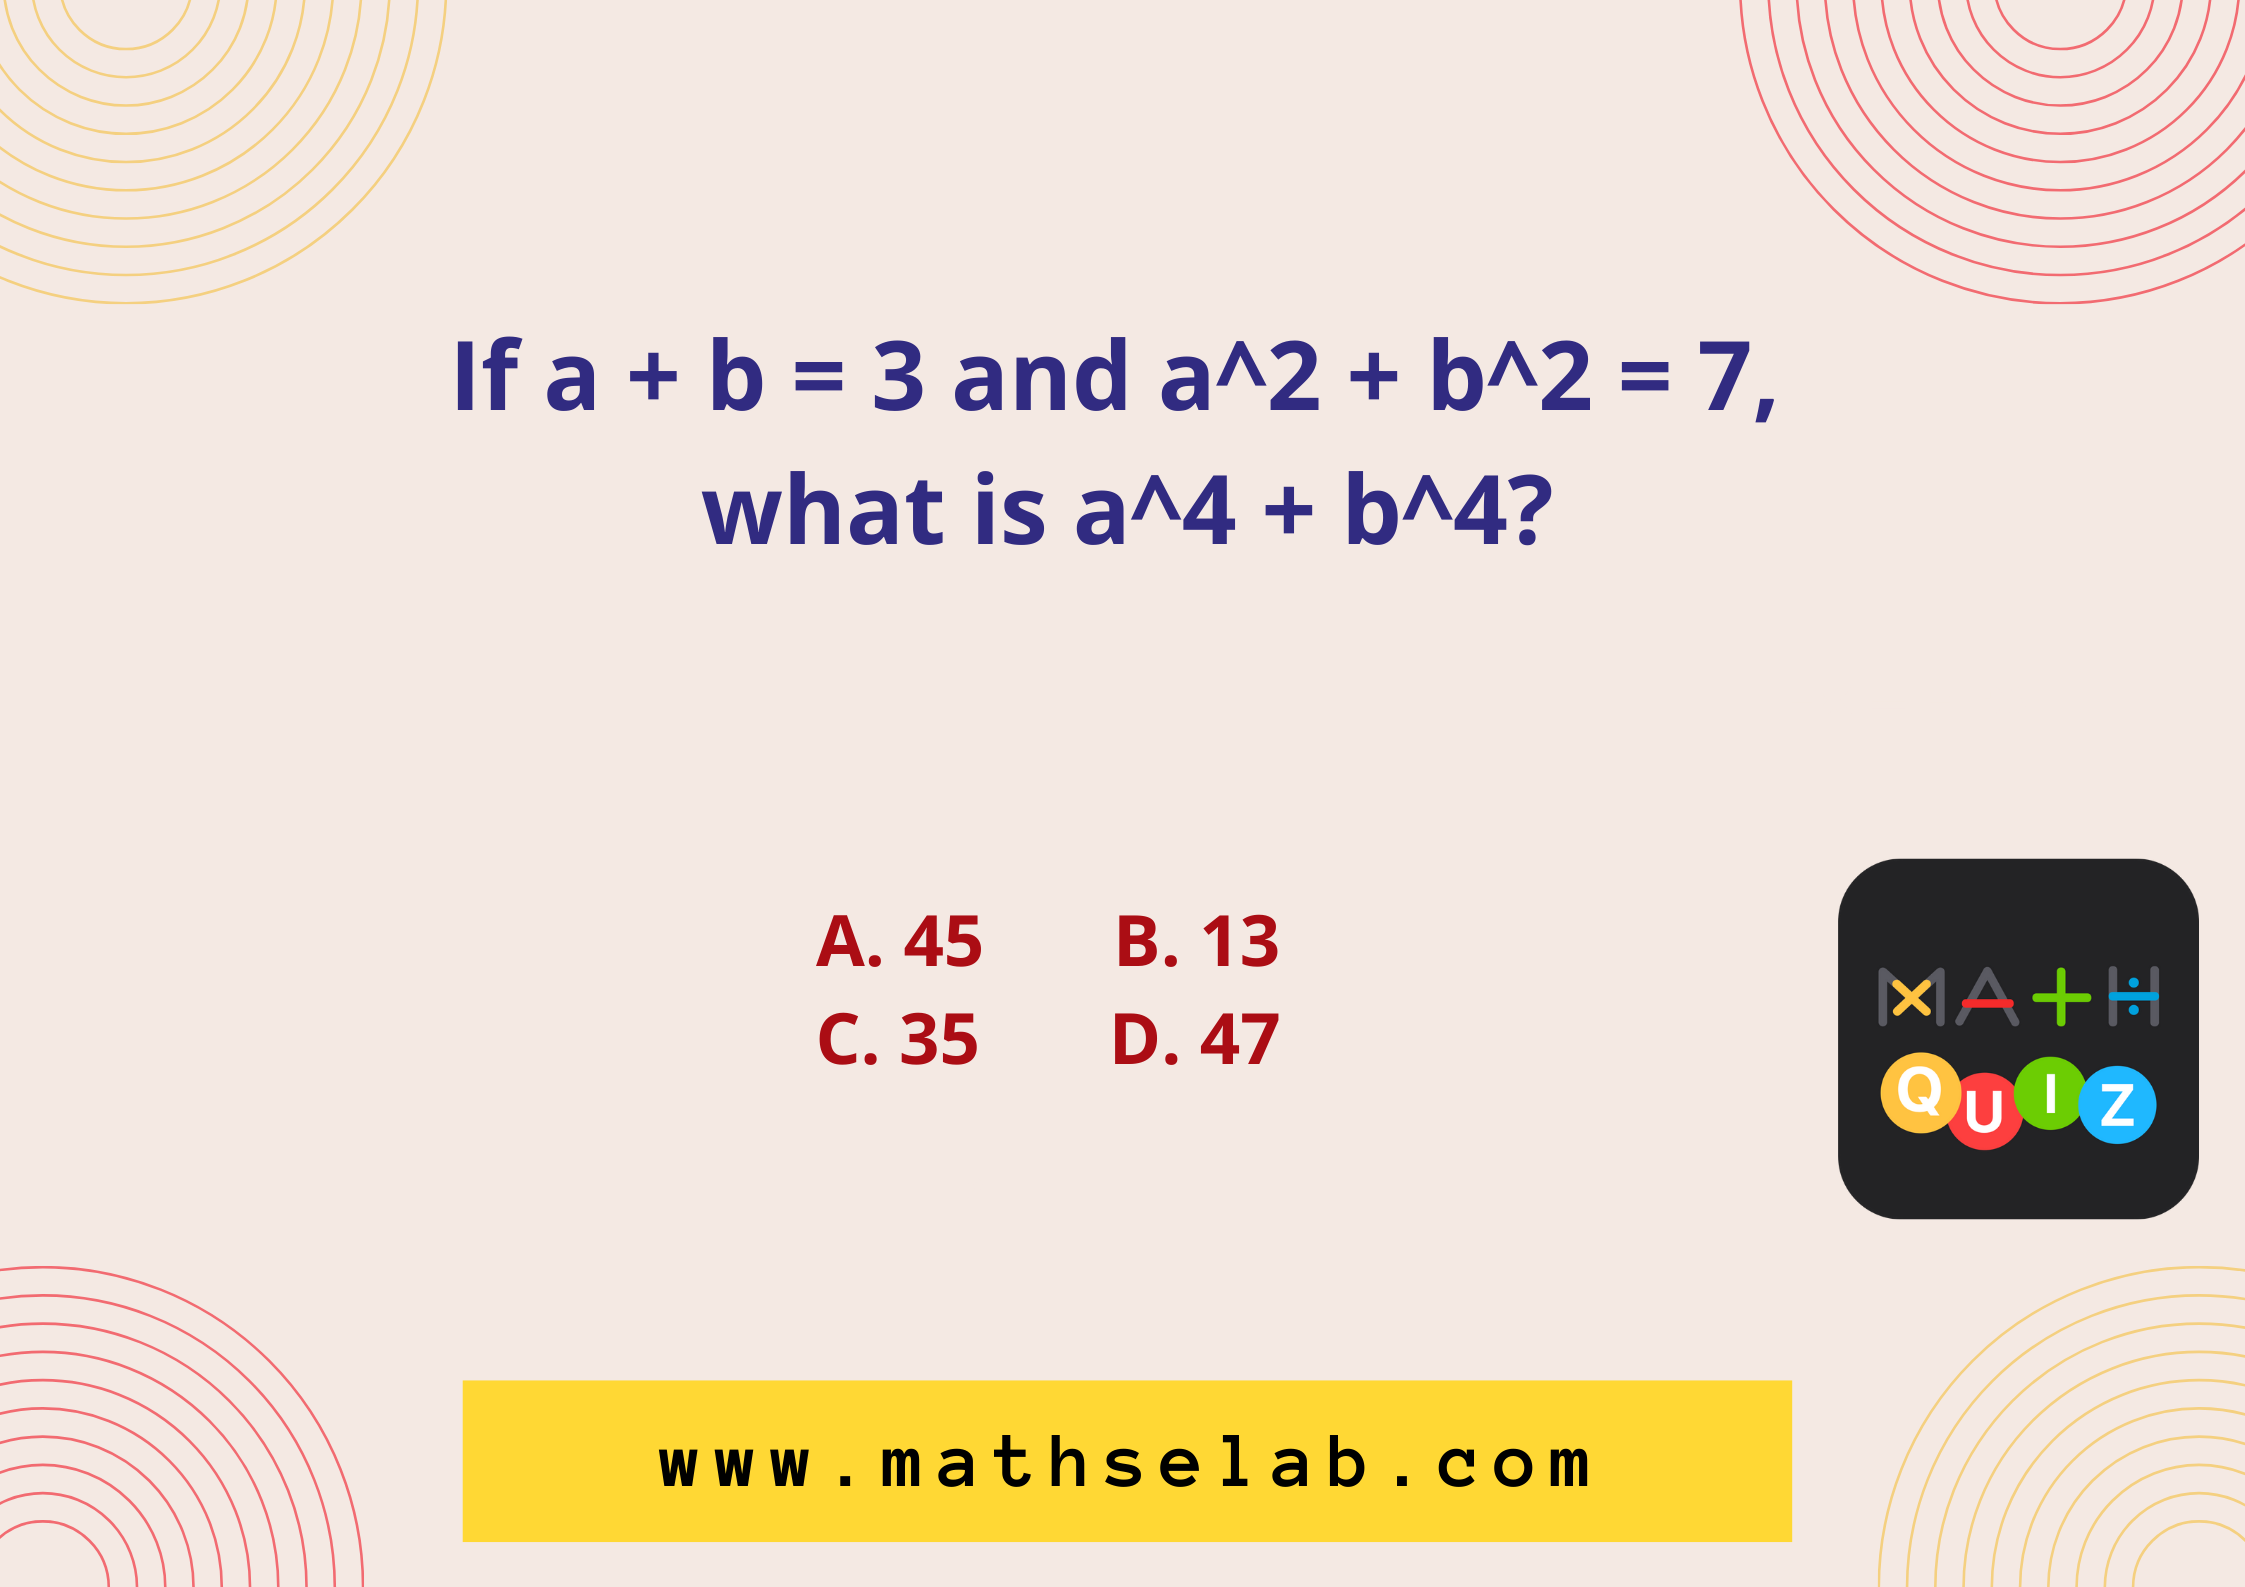 If a + b = 3 and a^2 + b^2 = 7, what is a^4 + b^4? - mathselab.com